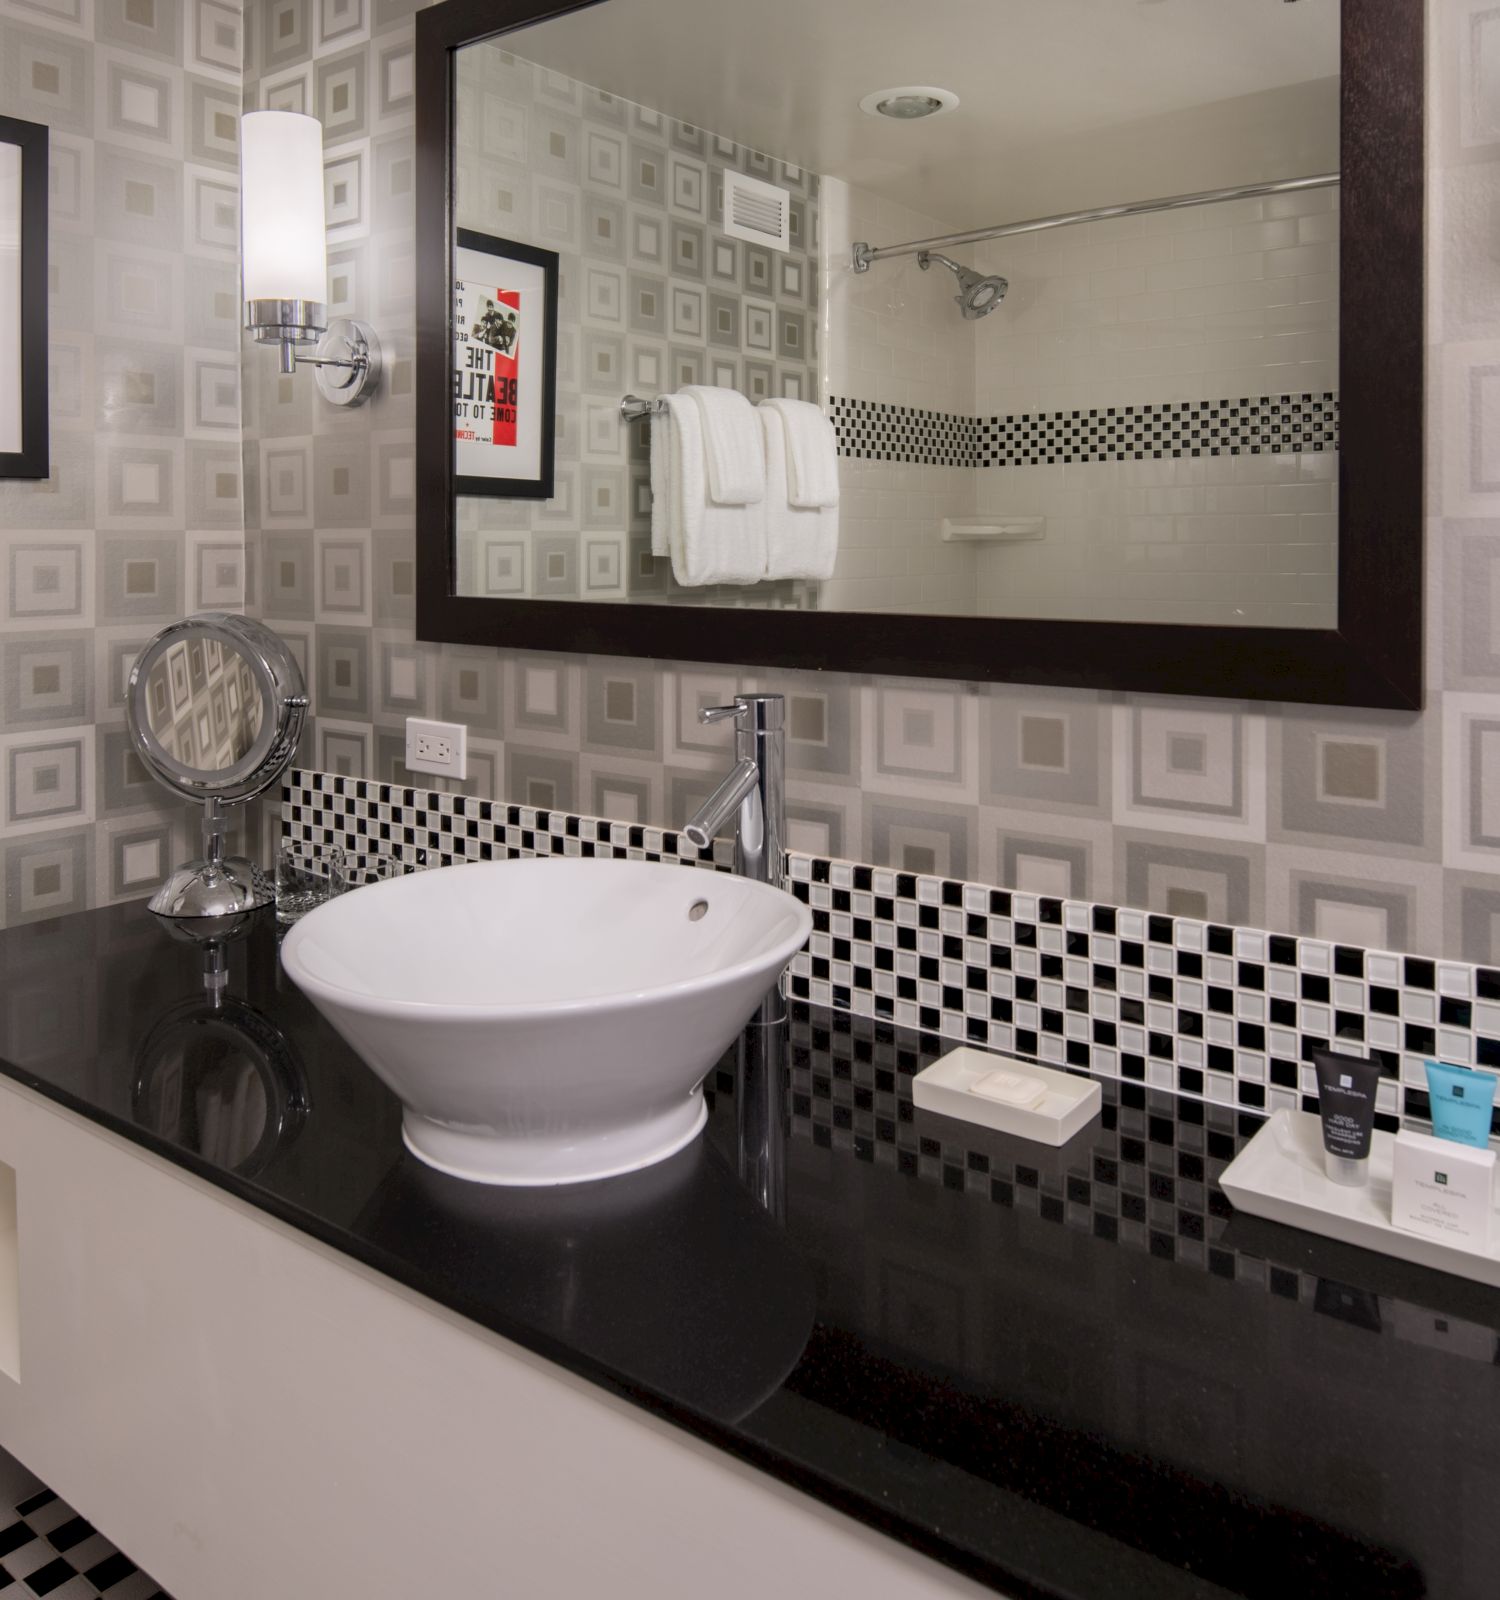 A modern bathroom features a white sink on a black countertop, a large mirror, a wall art piece, and geometric patterned tiles.